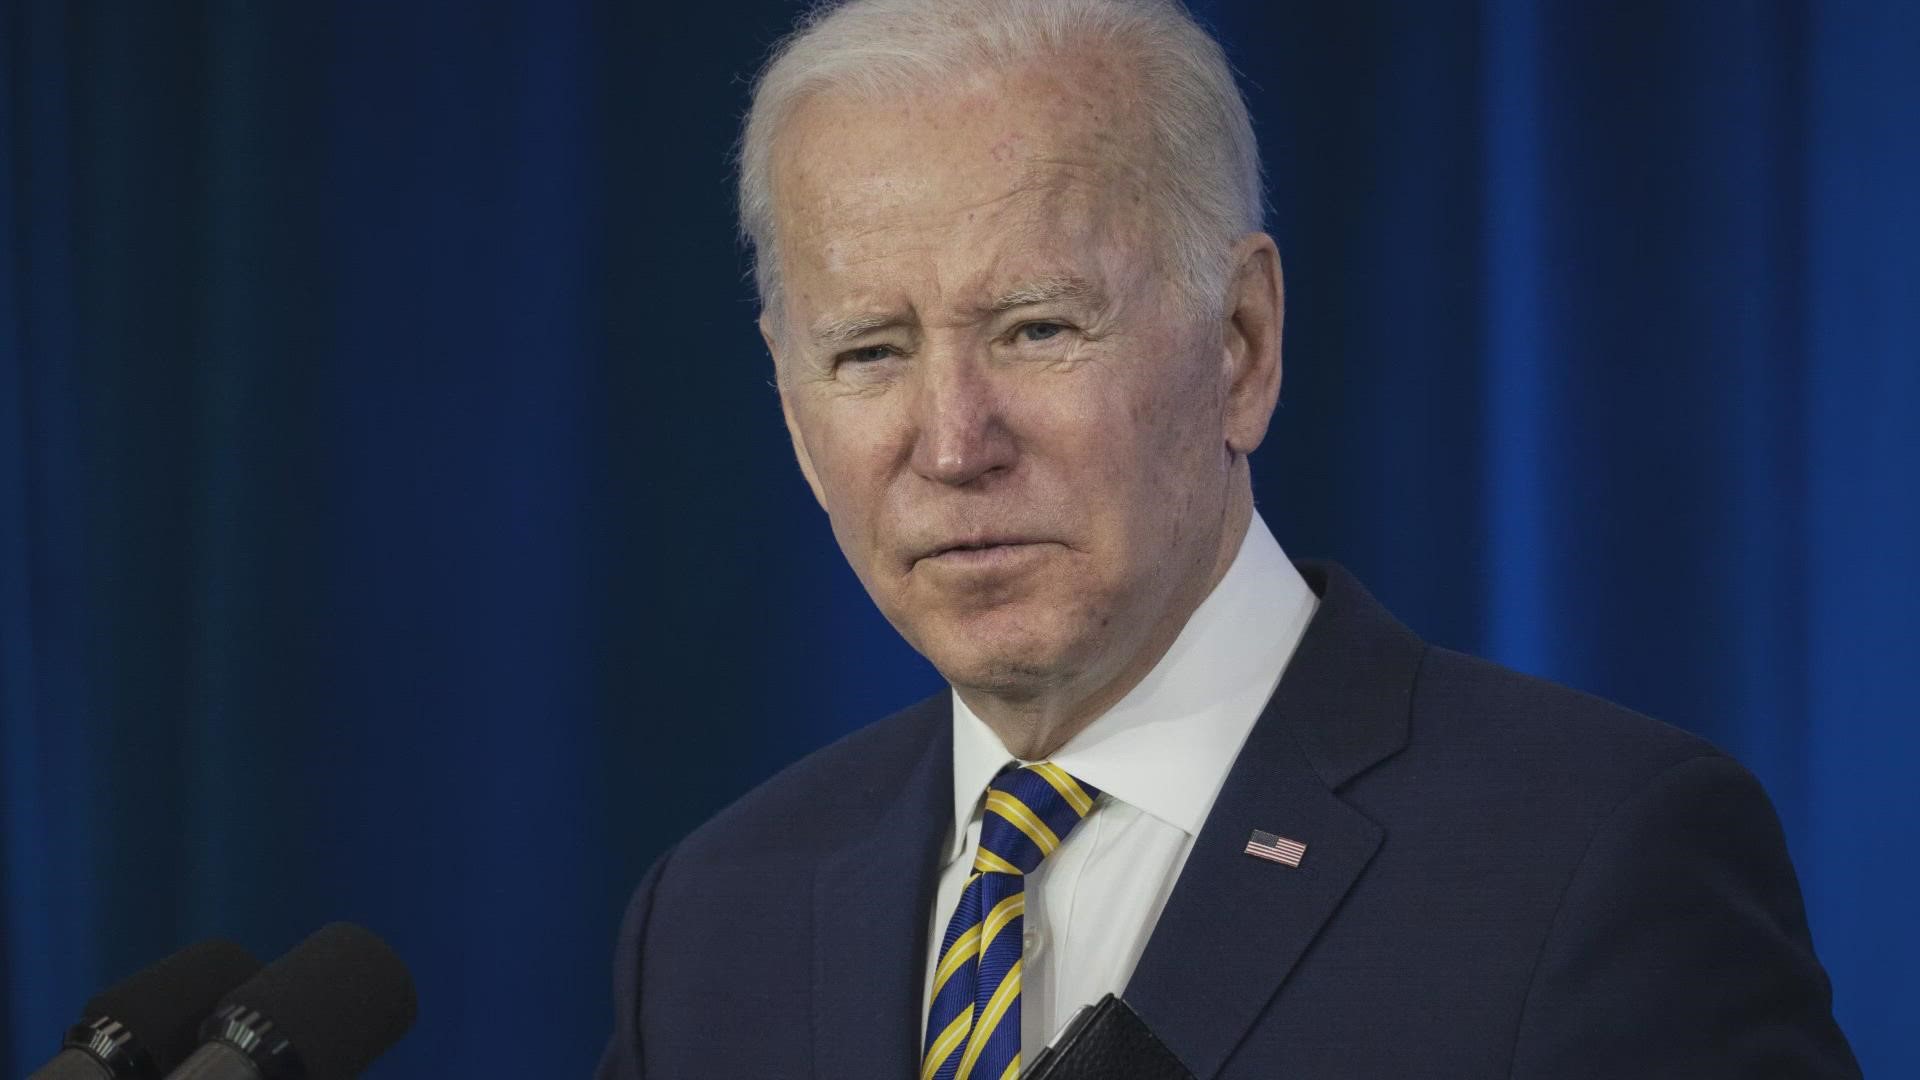 According to President Biden's personal attorney, the FBI is conducting a "planned search" of the president's Delaware home